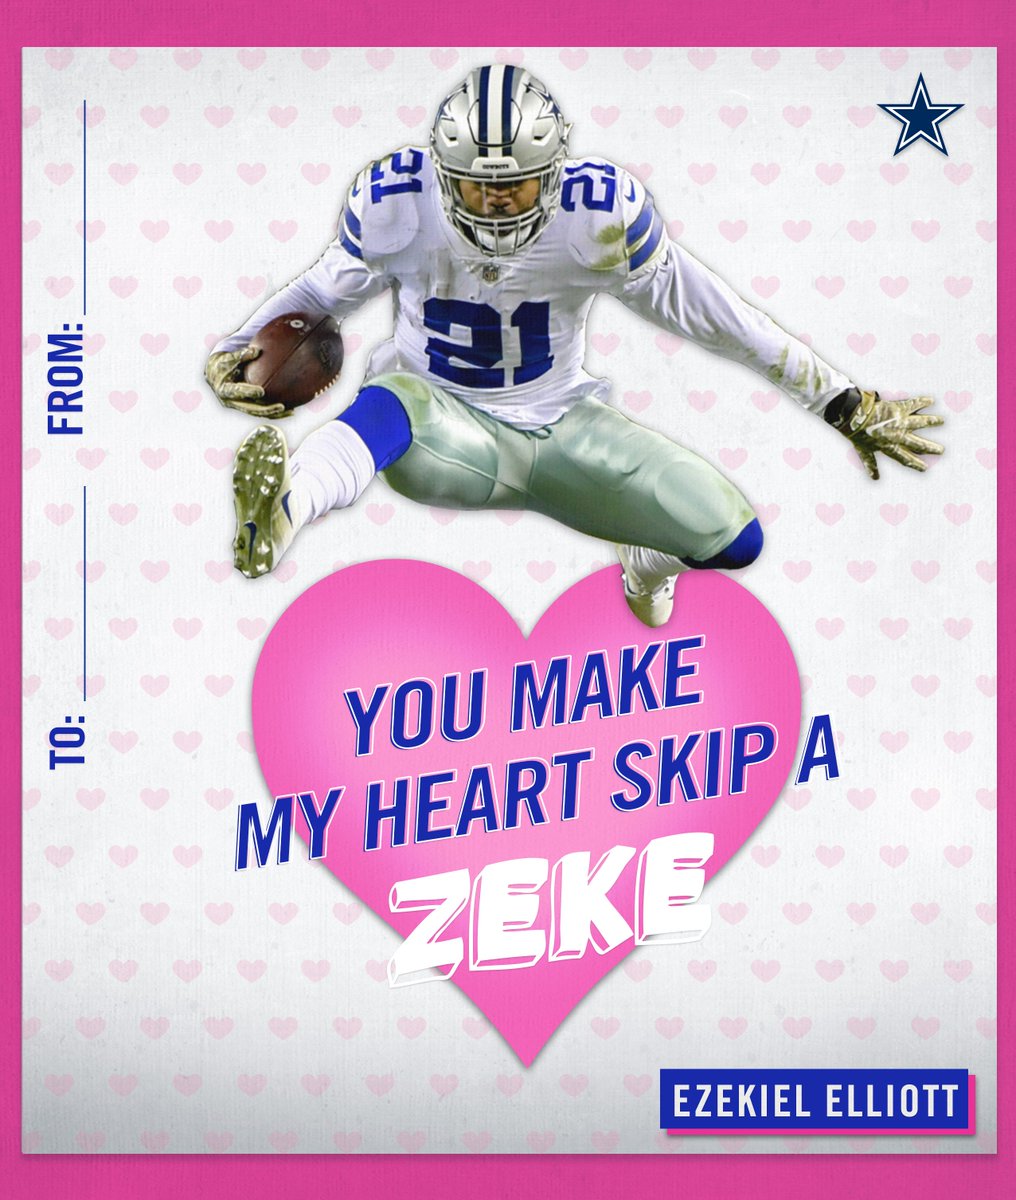 Dallas Cowboys on X: "Happy #Valentines Day, #CowboysNation! Be sure to tag that special someone! https://t.co/YFlCSf4ACO" / X